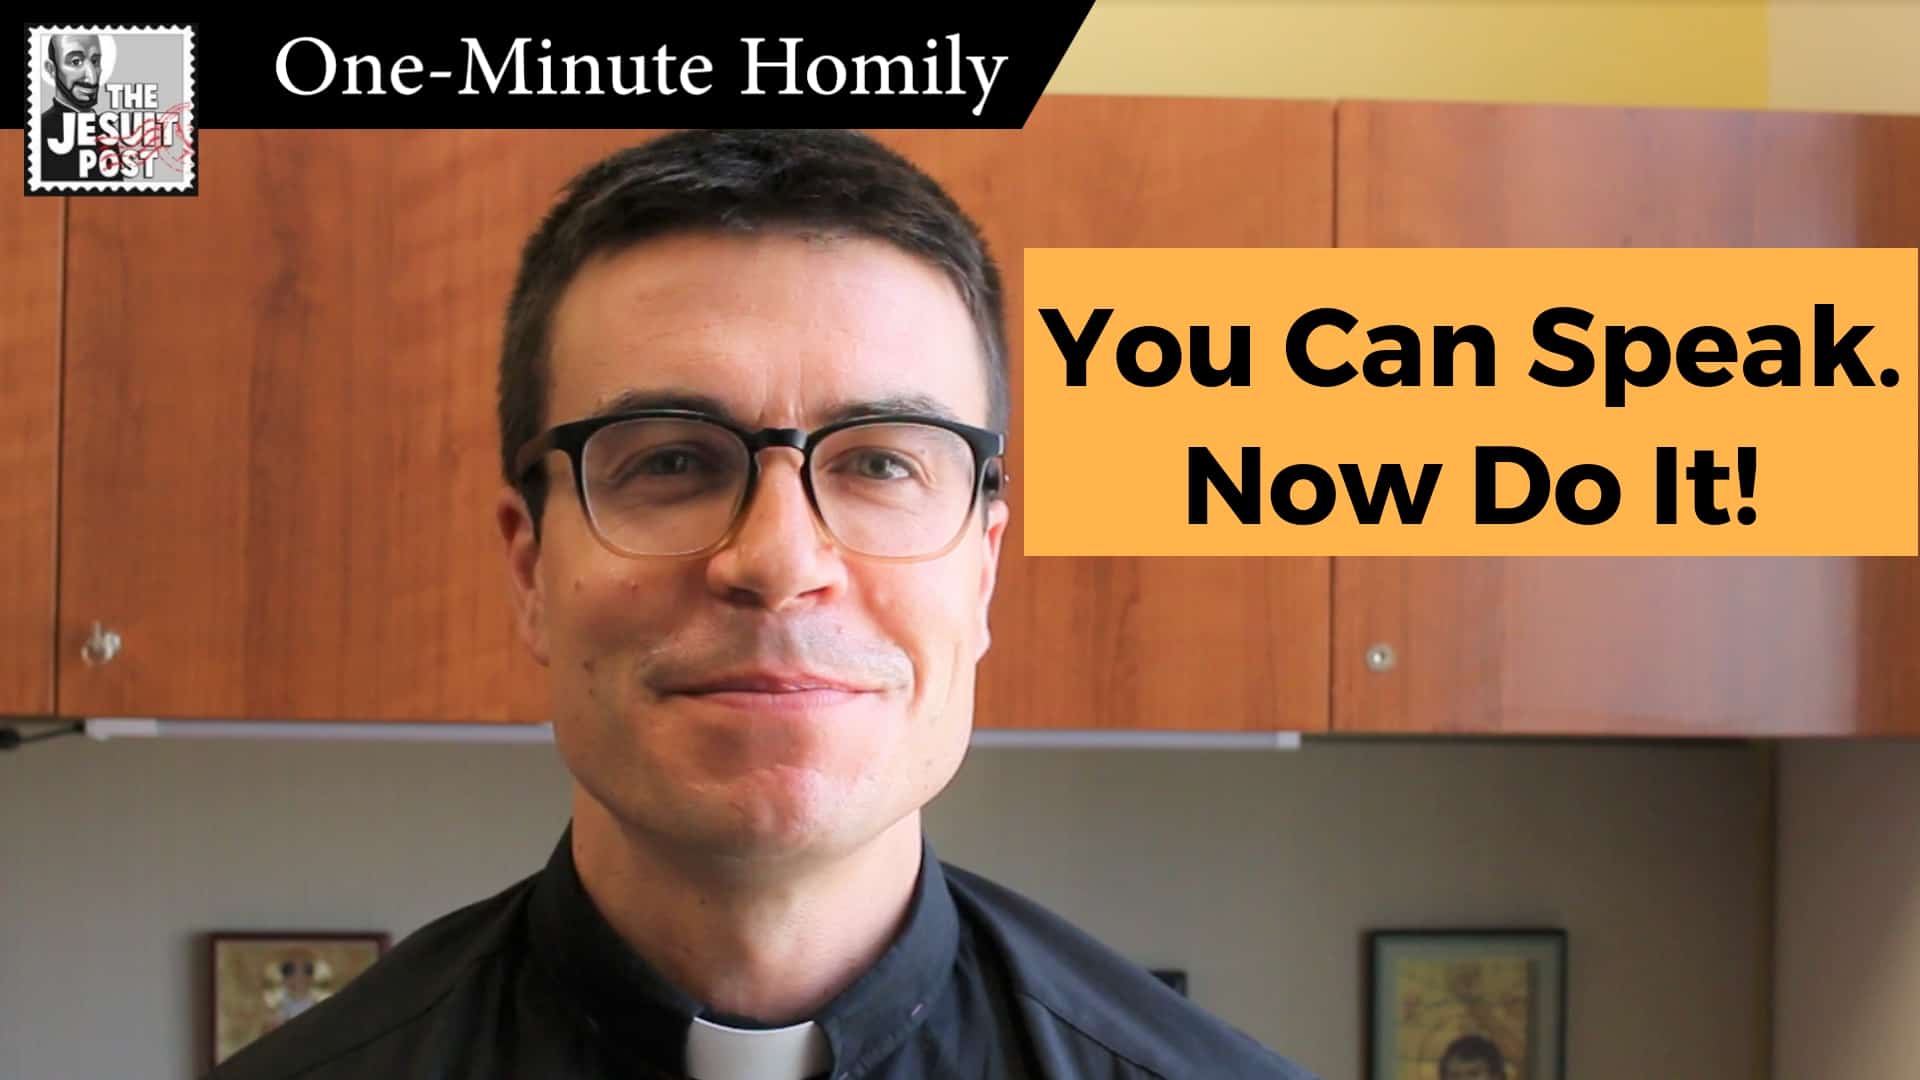 One-Minute Homily: “You Can Speak. Now Do It!”